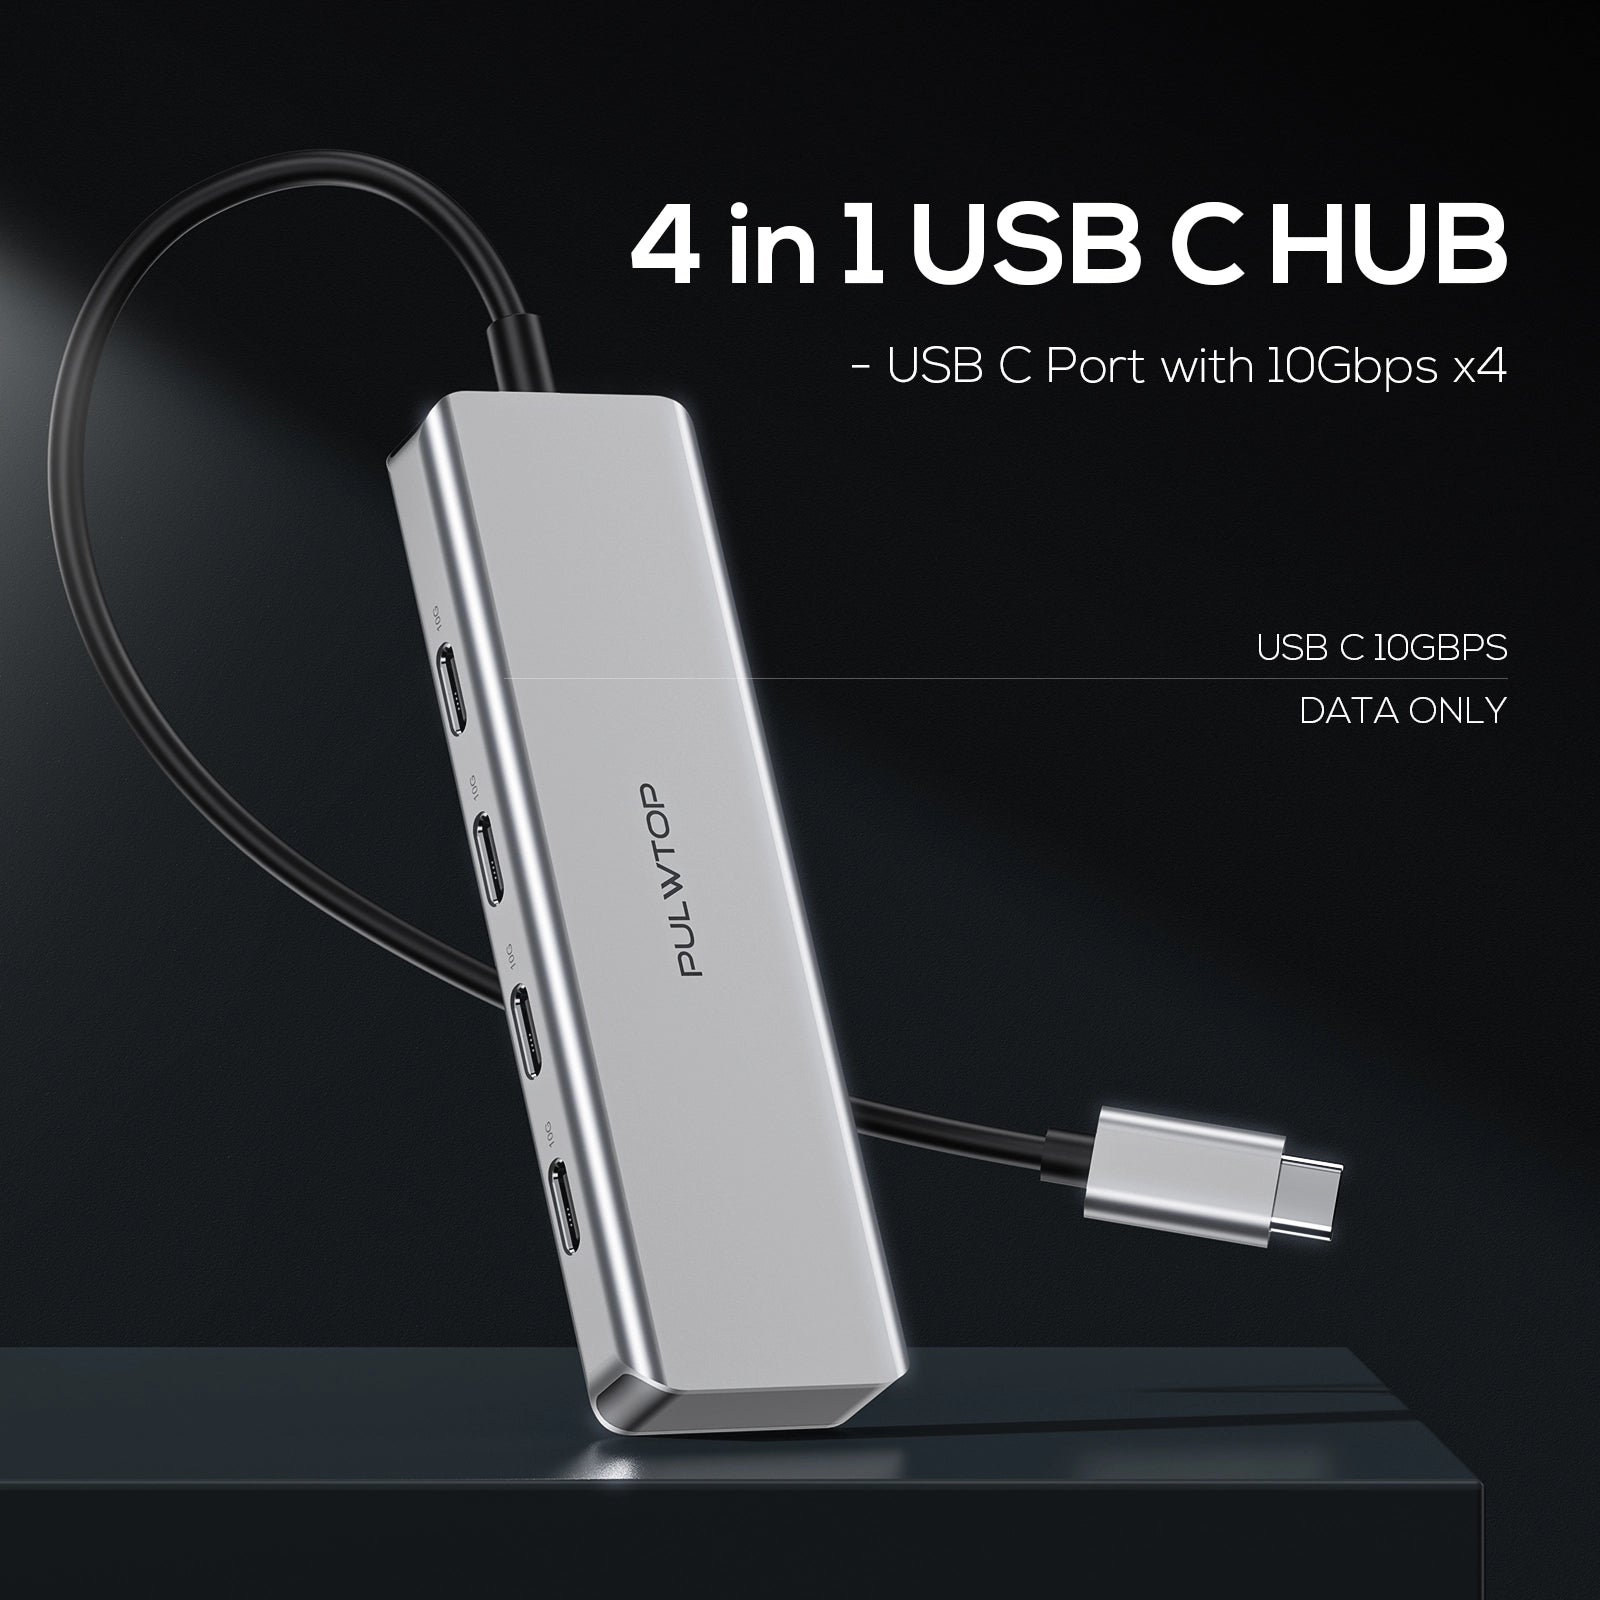 USB C Hub 10Gbps with 4 USB 3.0 Ports for MacBook Pro/Air, iMac, iPad, Phone, Dell, HP, Lenovo, Surface Pro, Chromebook and More